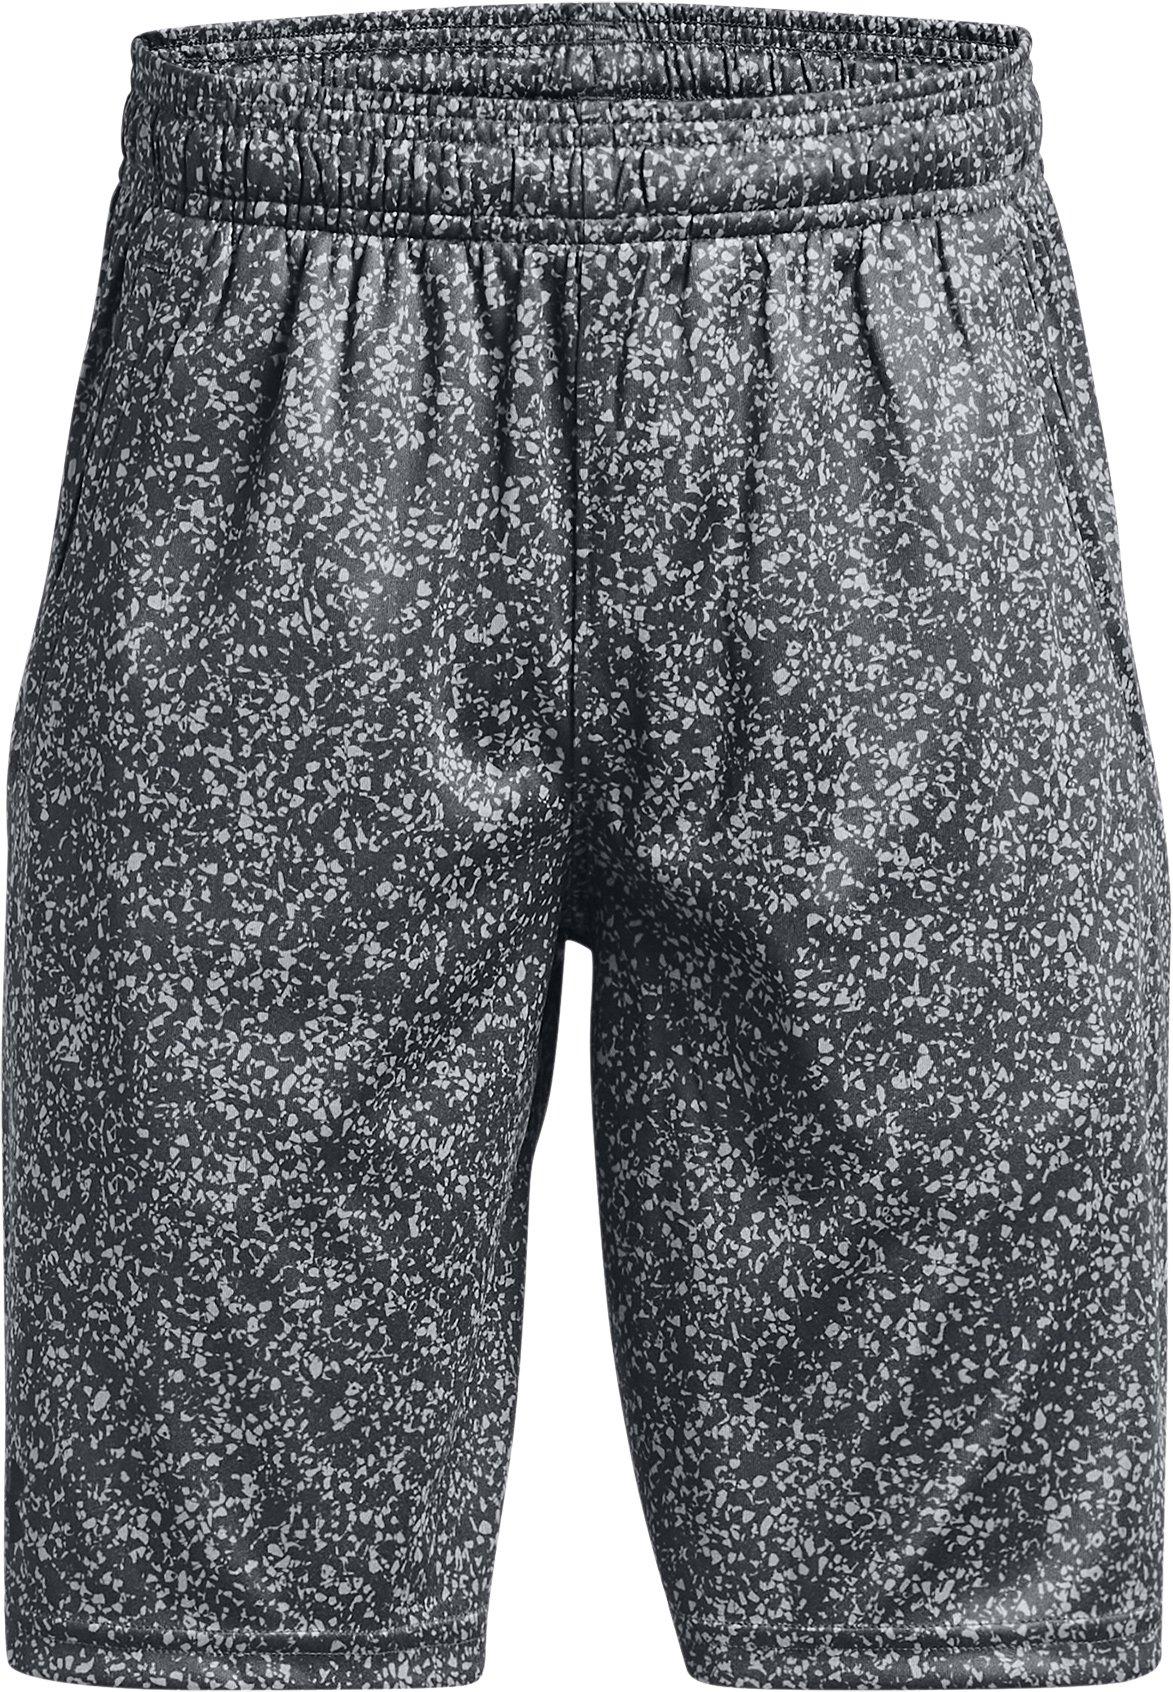 Under Armour Renegade 3.0 PRTD Shorts-GRY XS